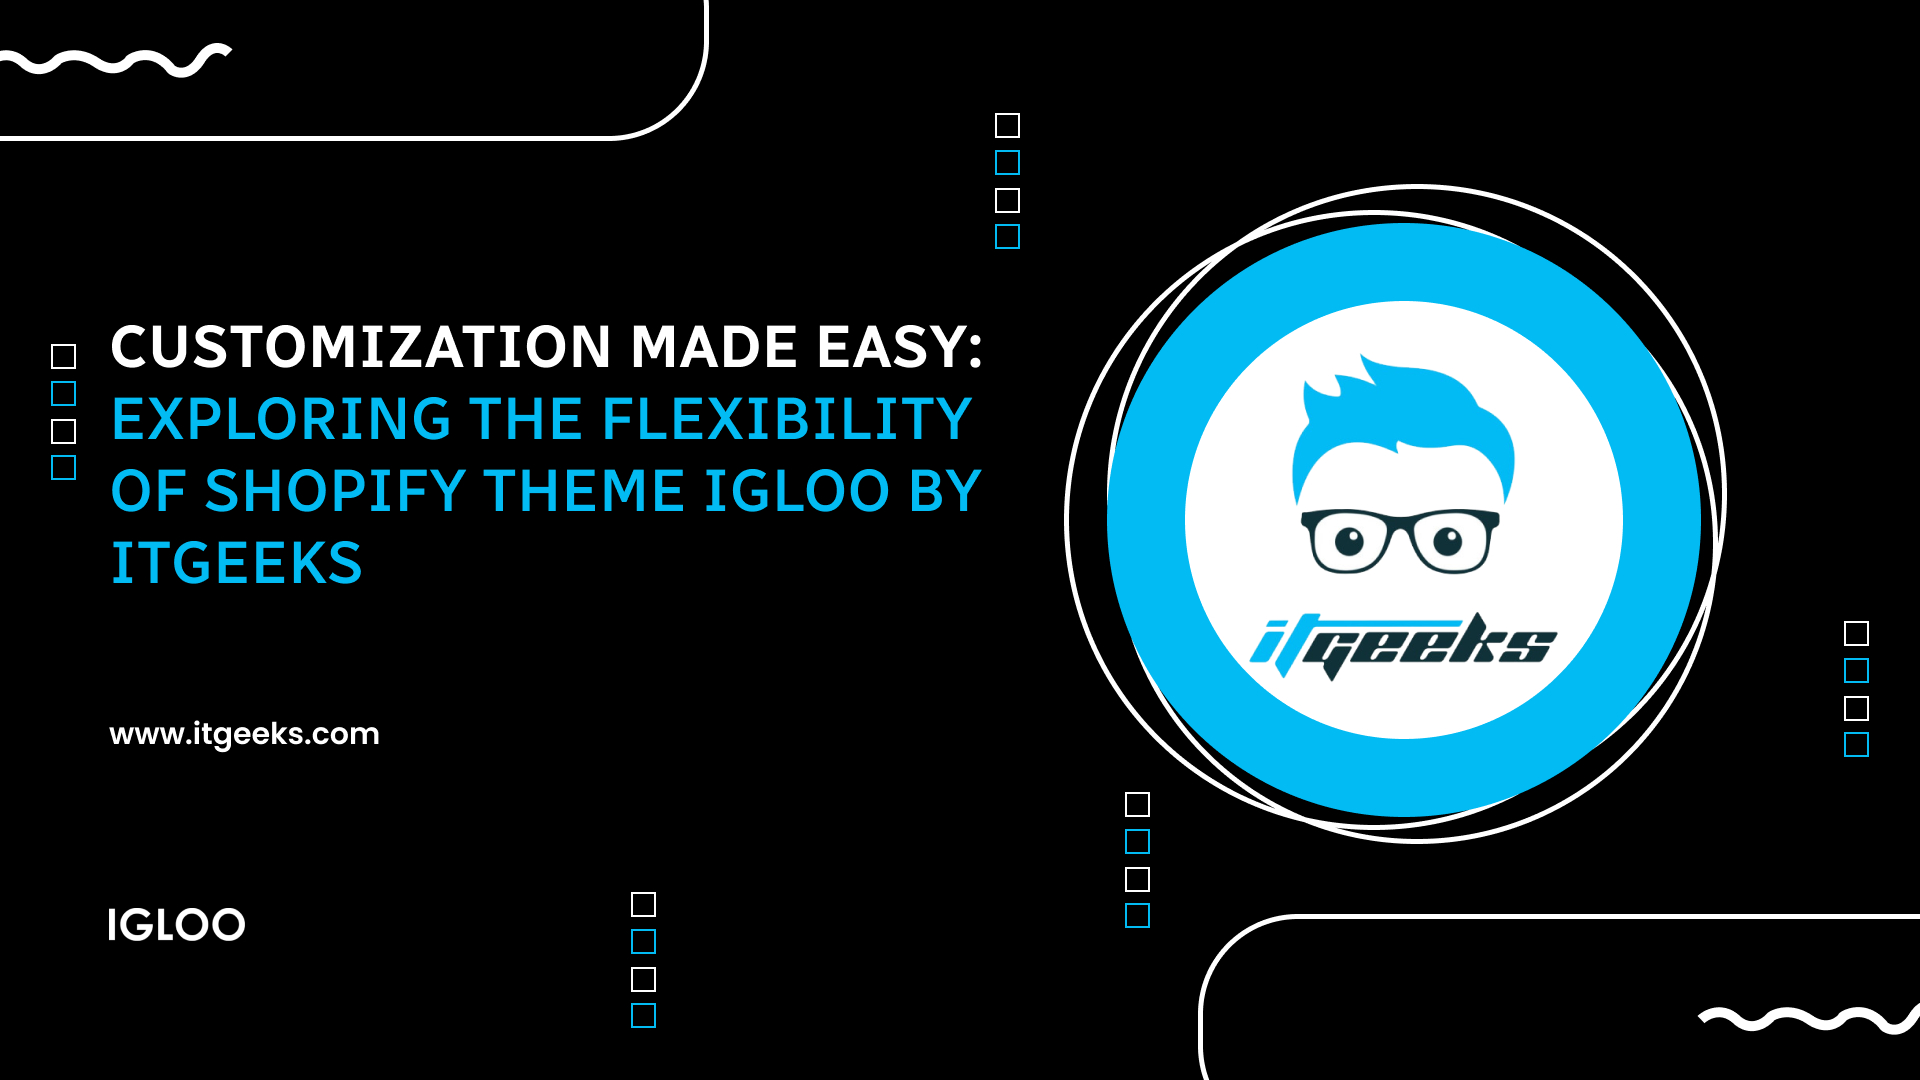 Customization Made Easy: Exploring the Flexibility of Shopify Theme IGLOO by ITGeeks